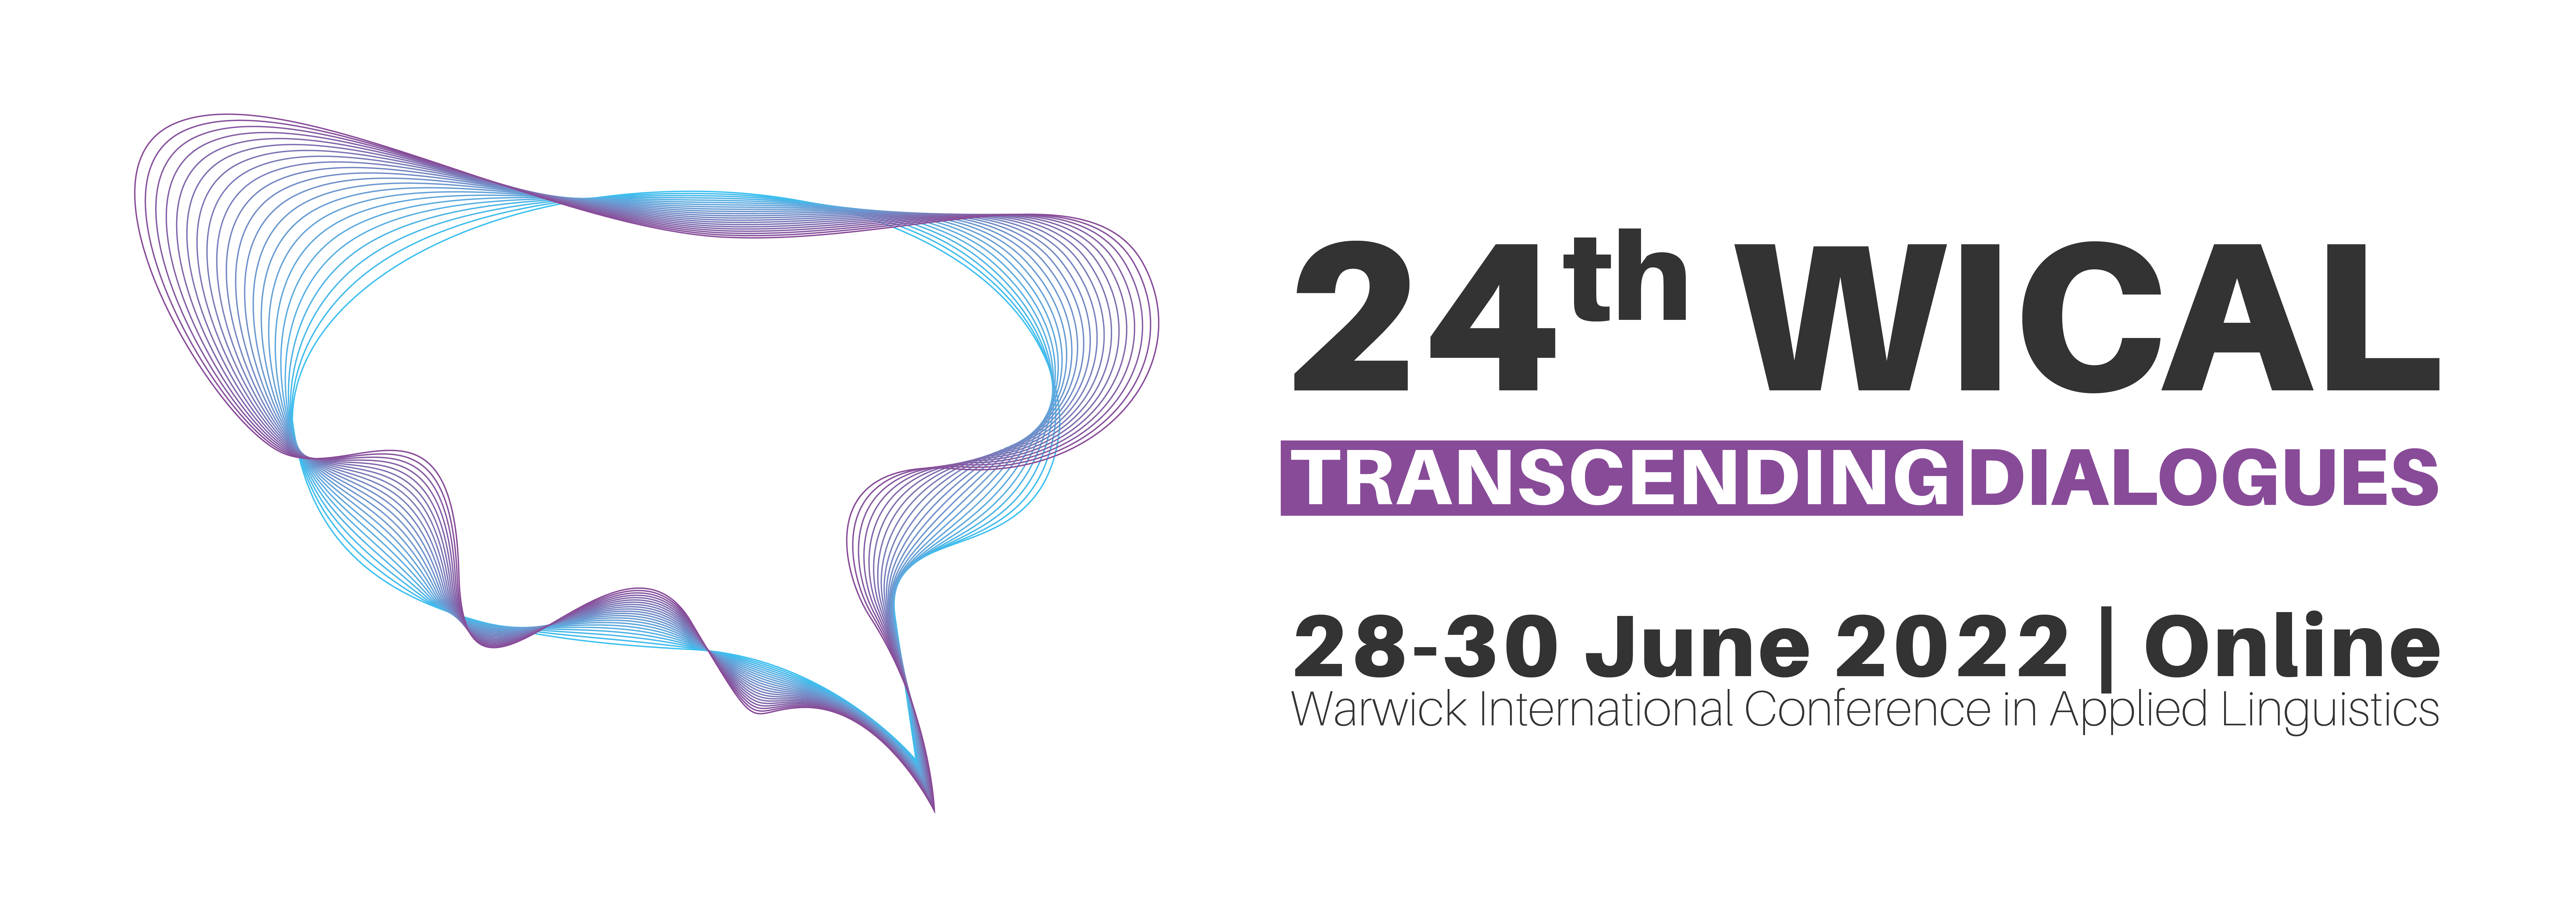 24th Warwick International Conference in Applied Linguistics on 28-30 June 2022